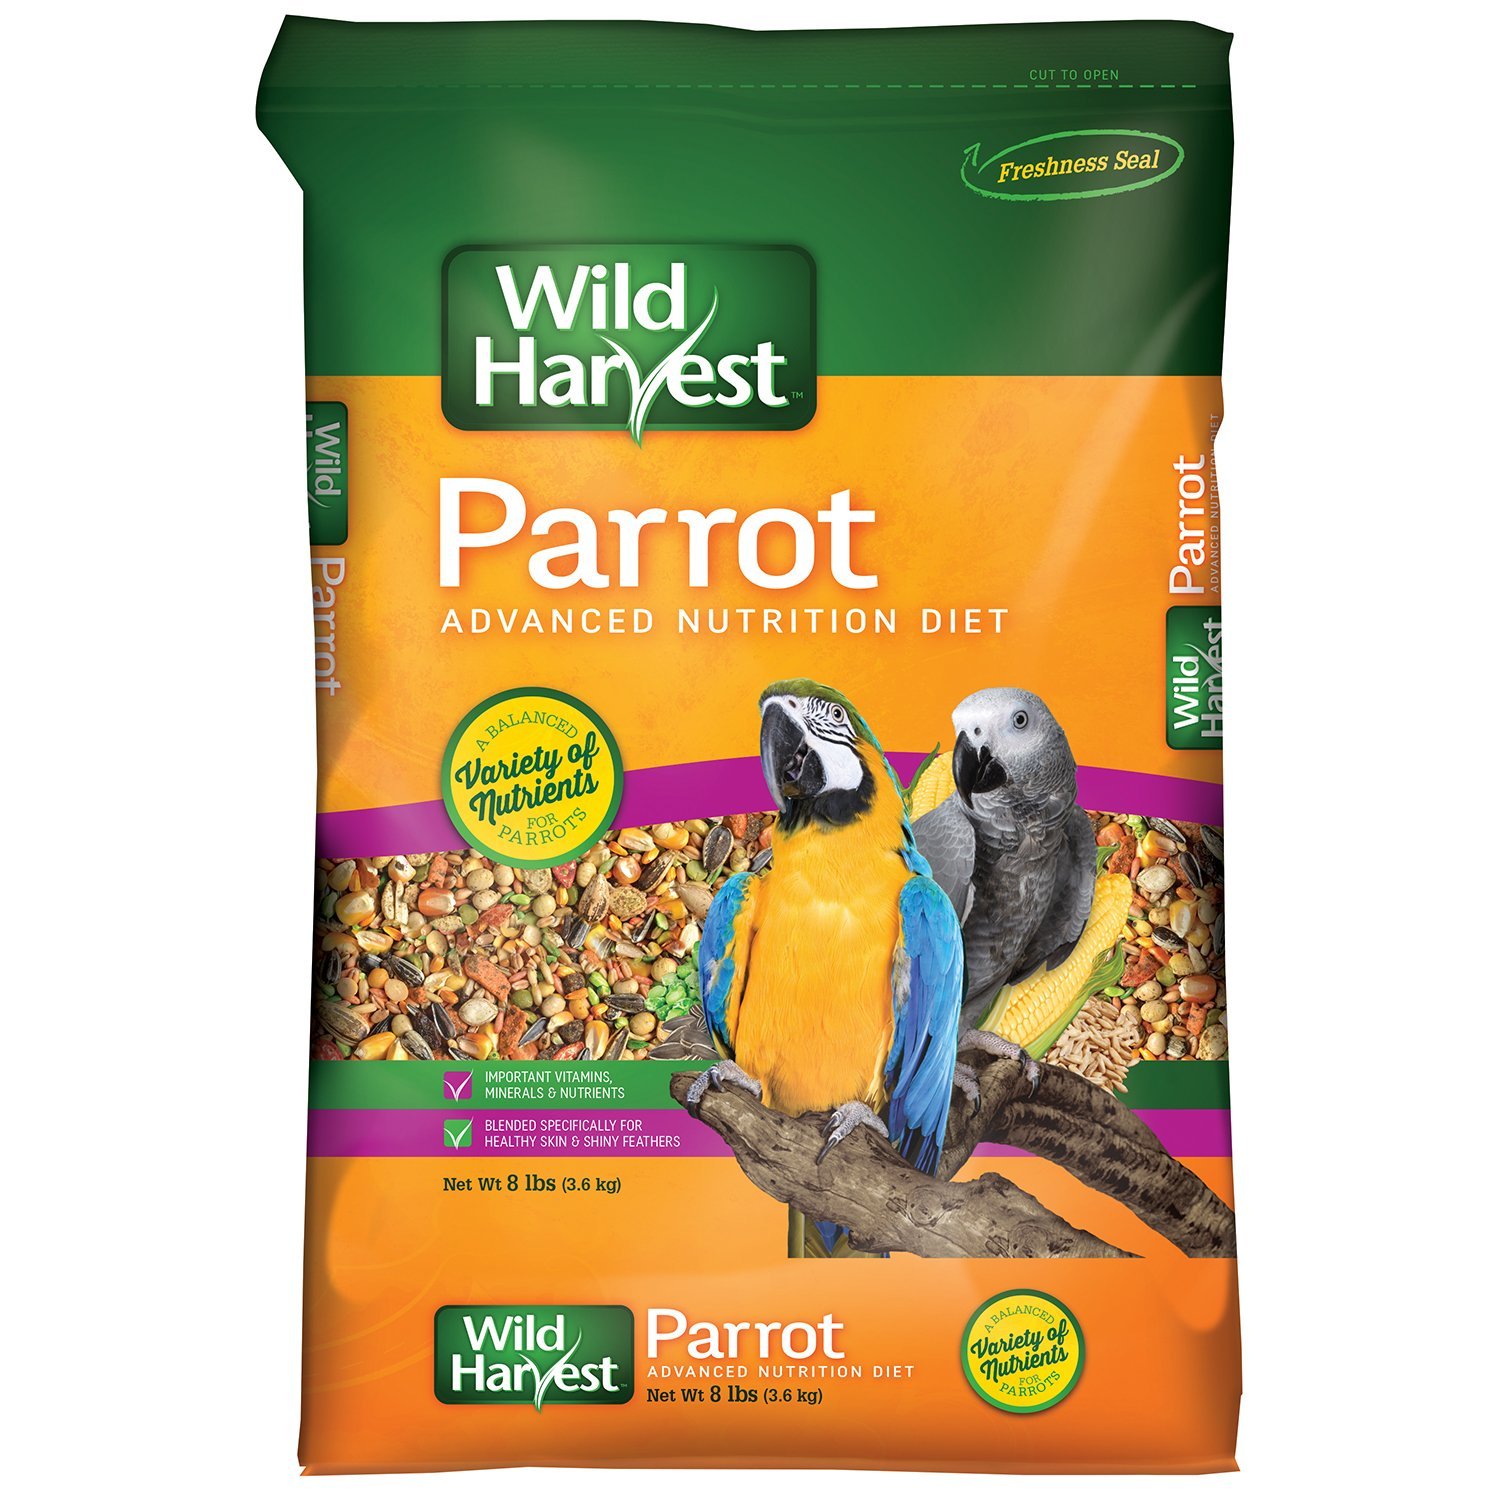 Wild Harvest Parrot Advanced Nutrition Diet Dry Bird Food, 8 lbs - image 1 of 4